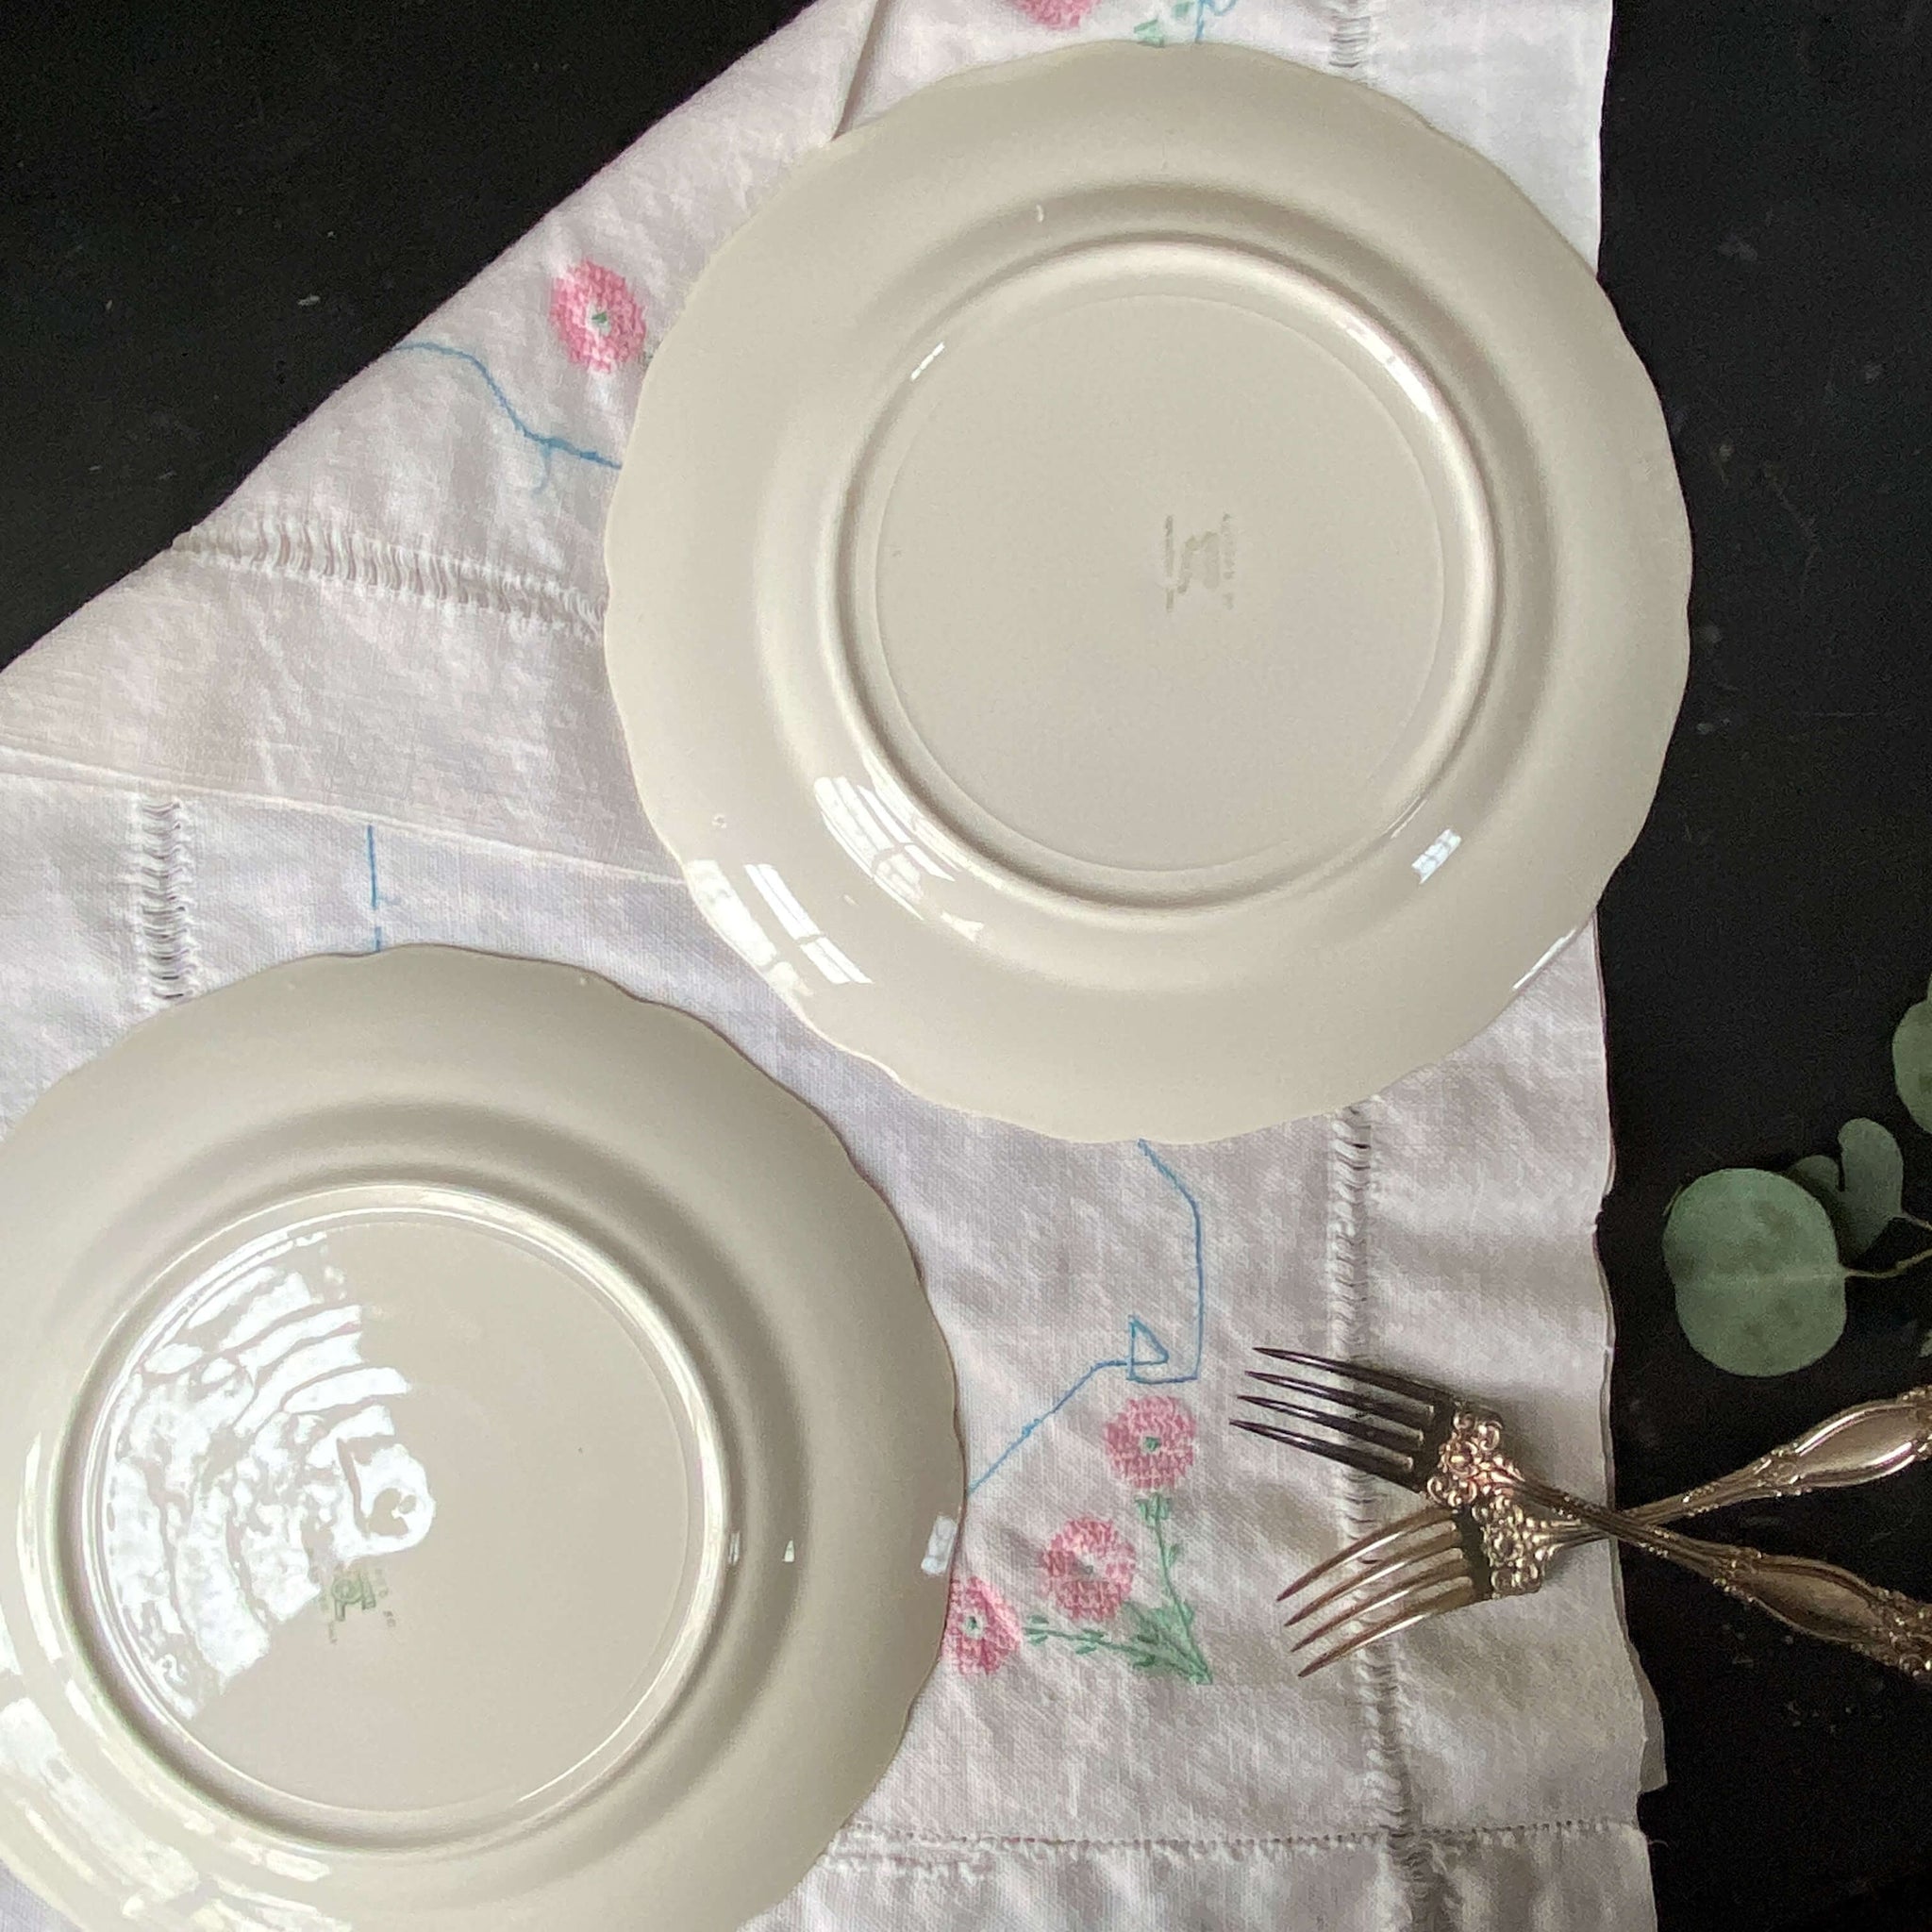 Vintage 1940s Canonsburg Indian Tree Dinner Plates - Set of Two